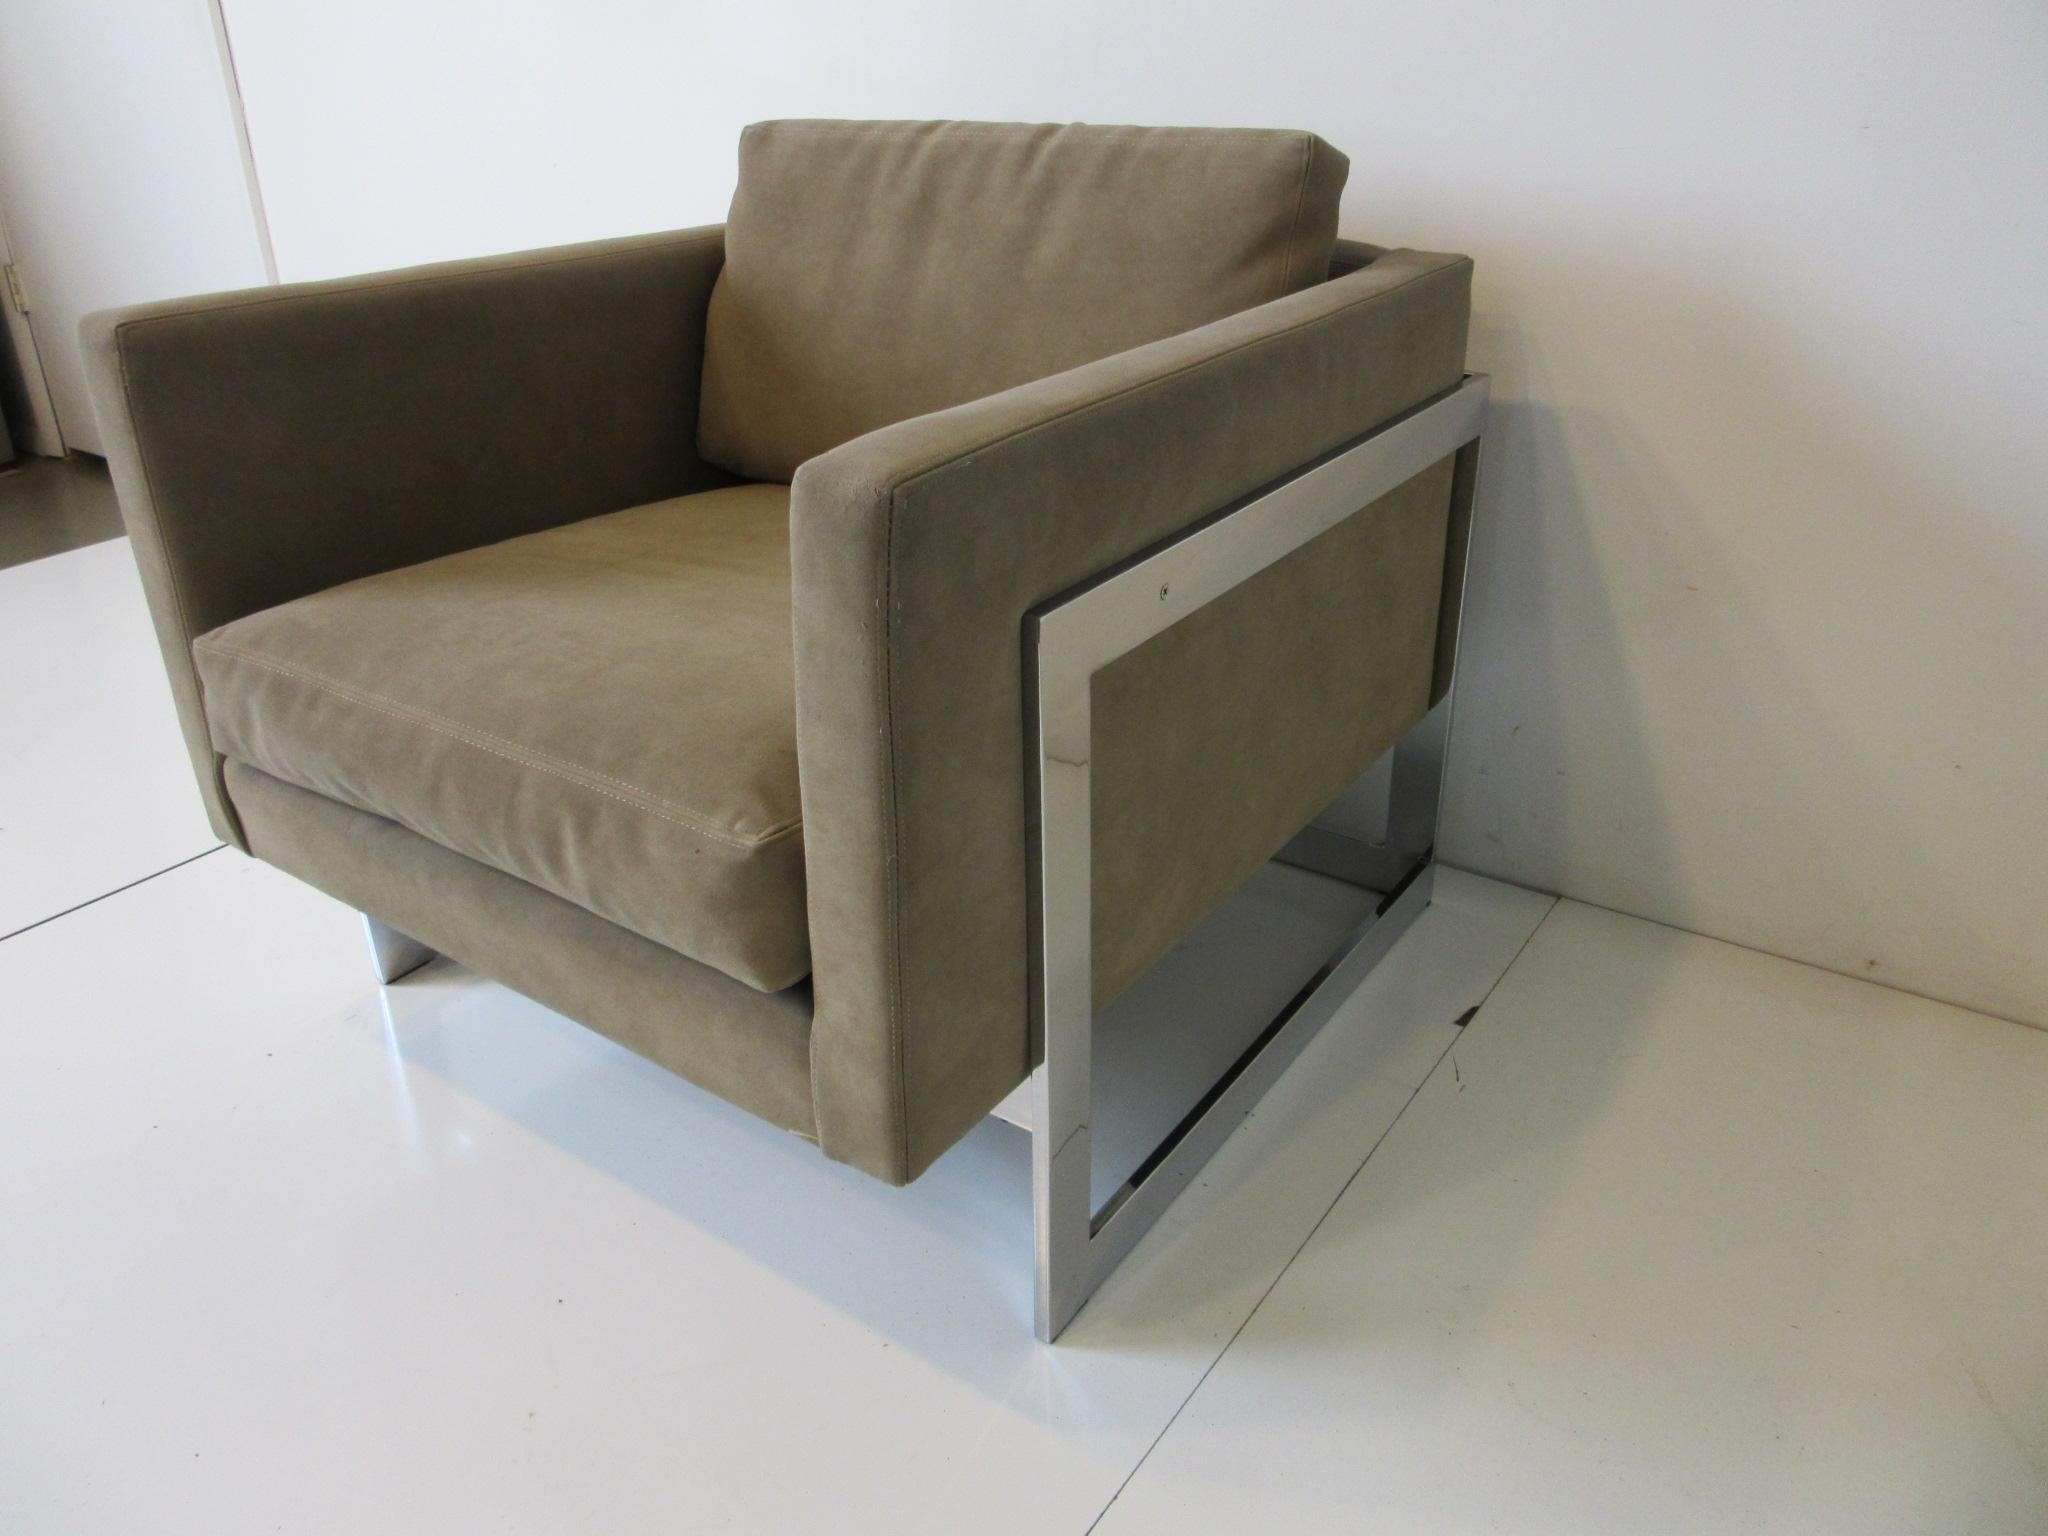 Upholstery Thayer Coggin Cube Cantilever Lounge Chair by Milo Baughman